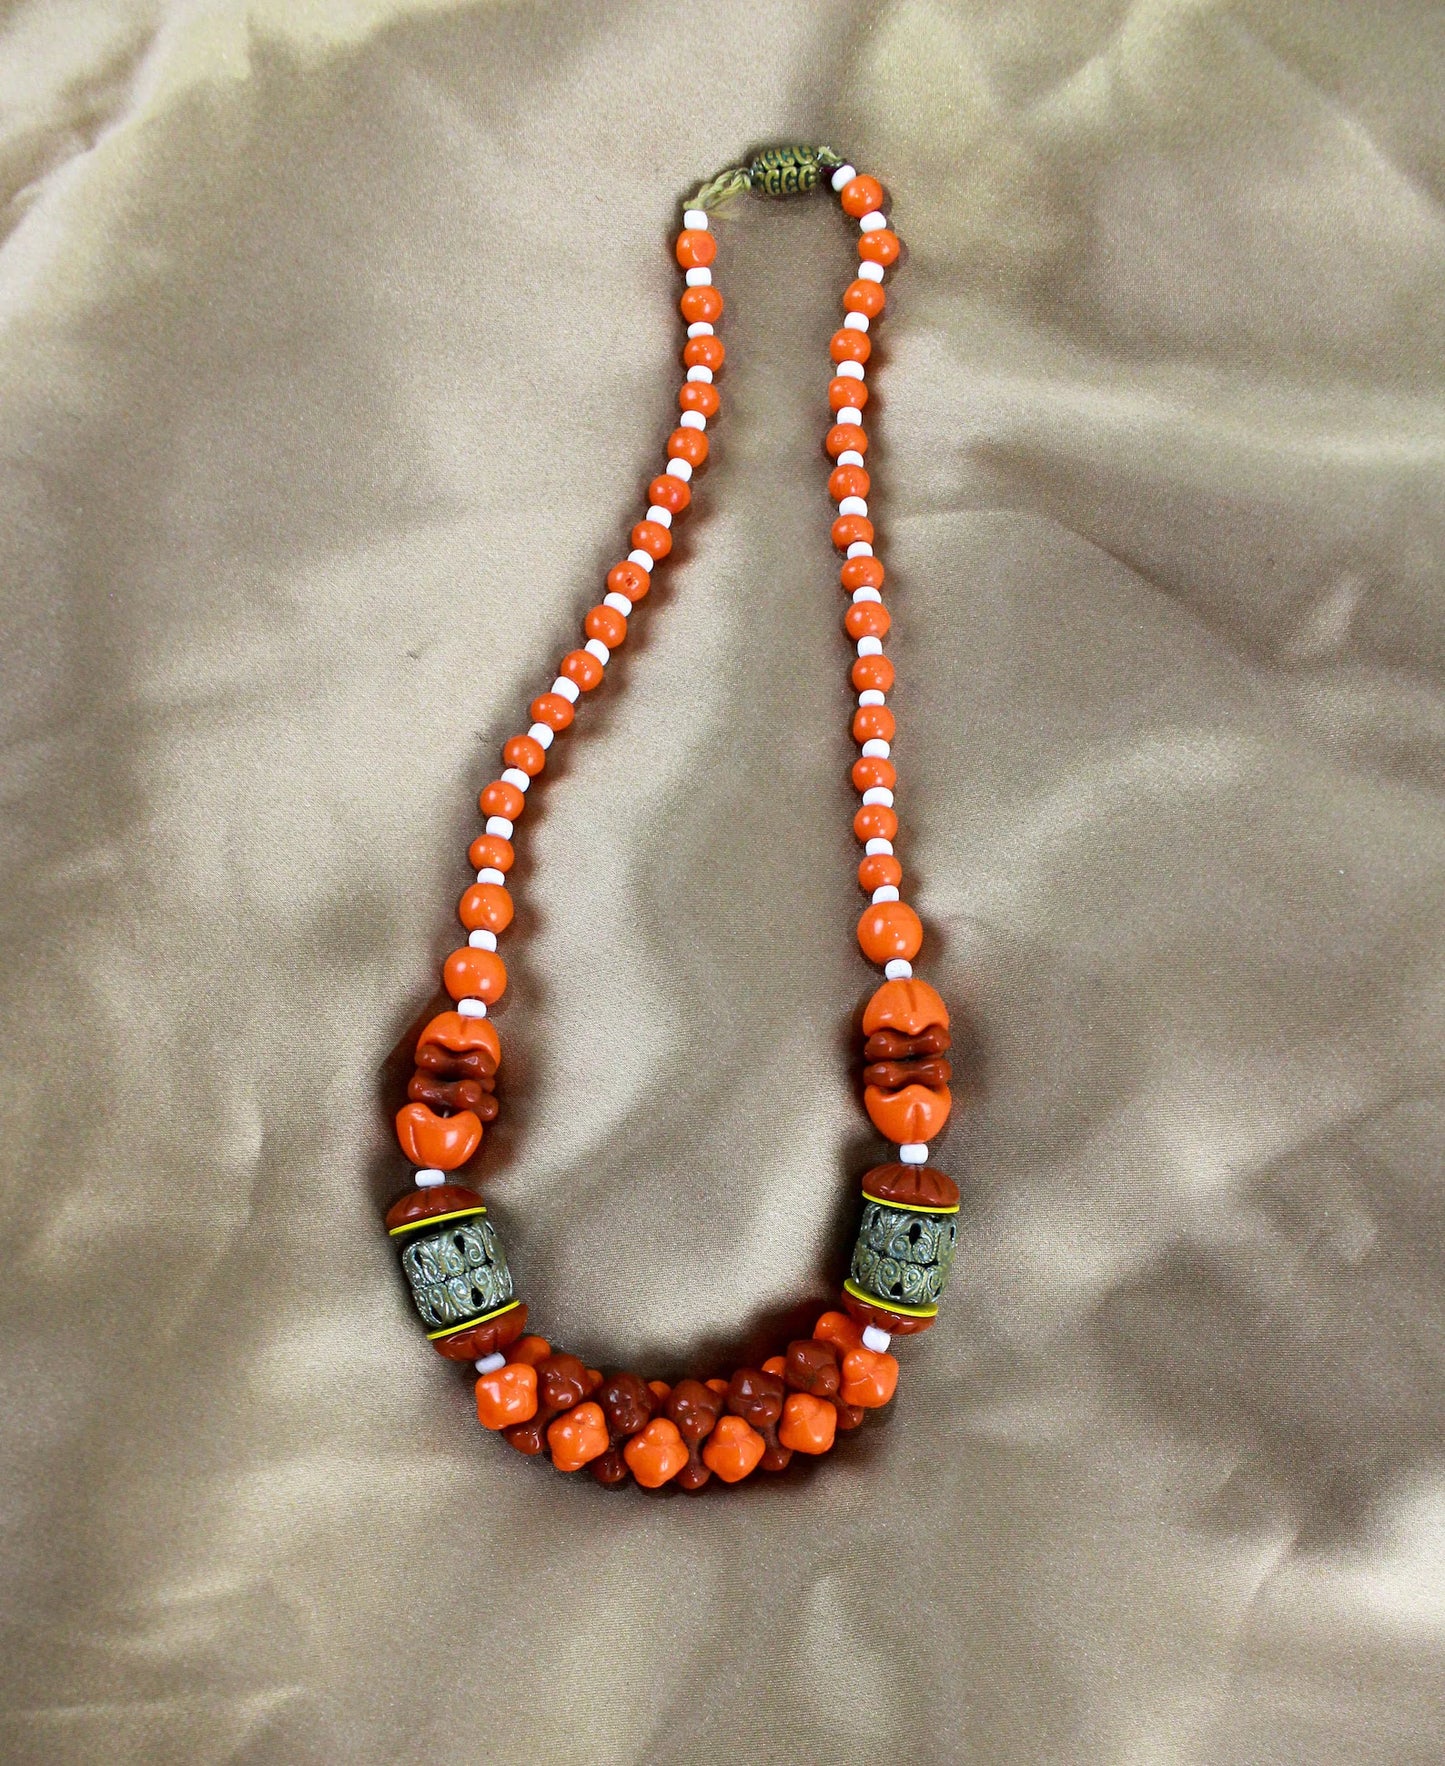 1930s Glass Beaded Necklace, Orange, White and Brown Beads with Metal Accents, Antique 30s Art Deco Necklace